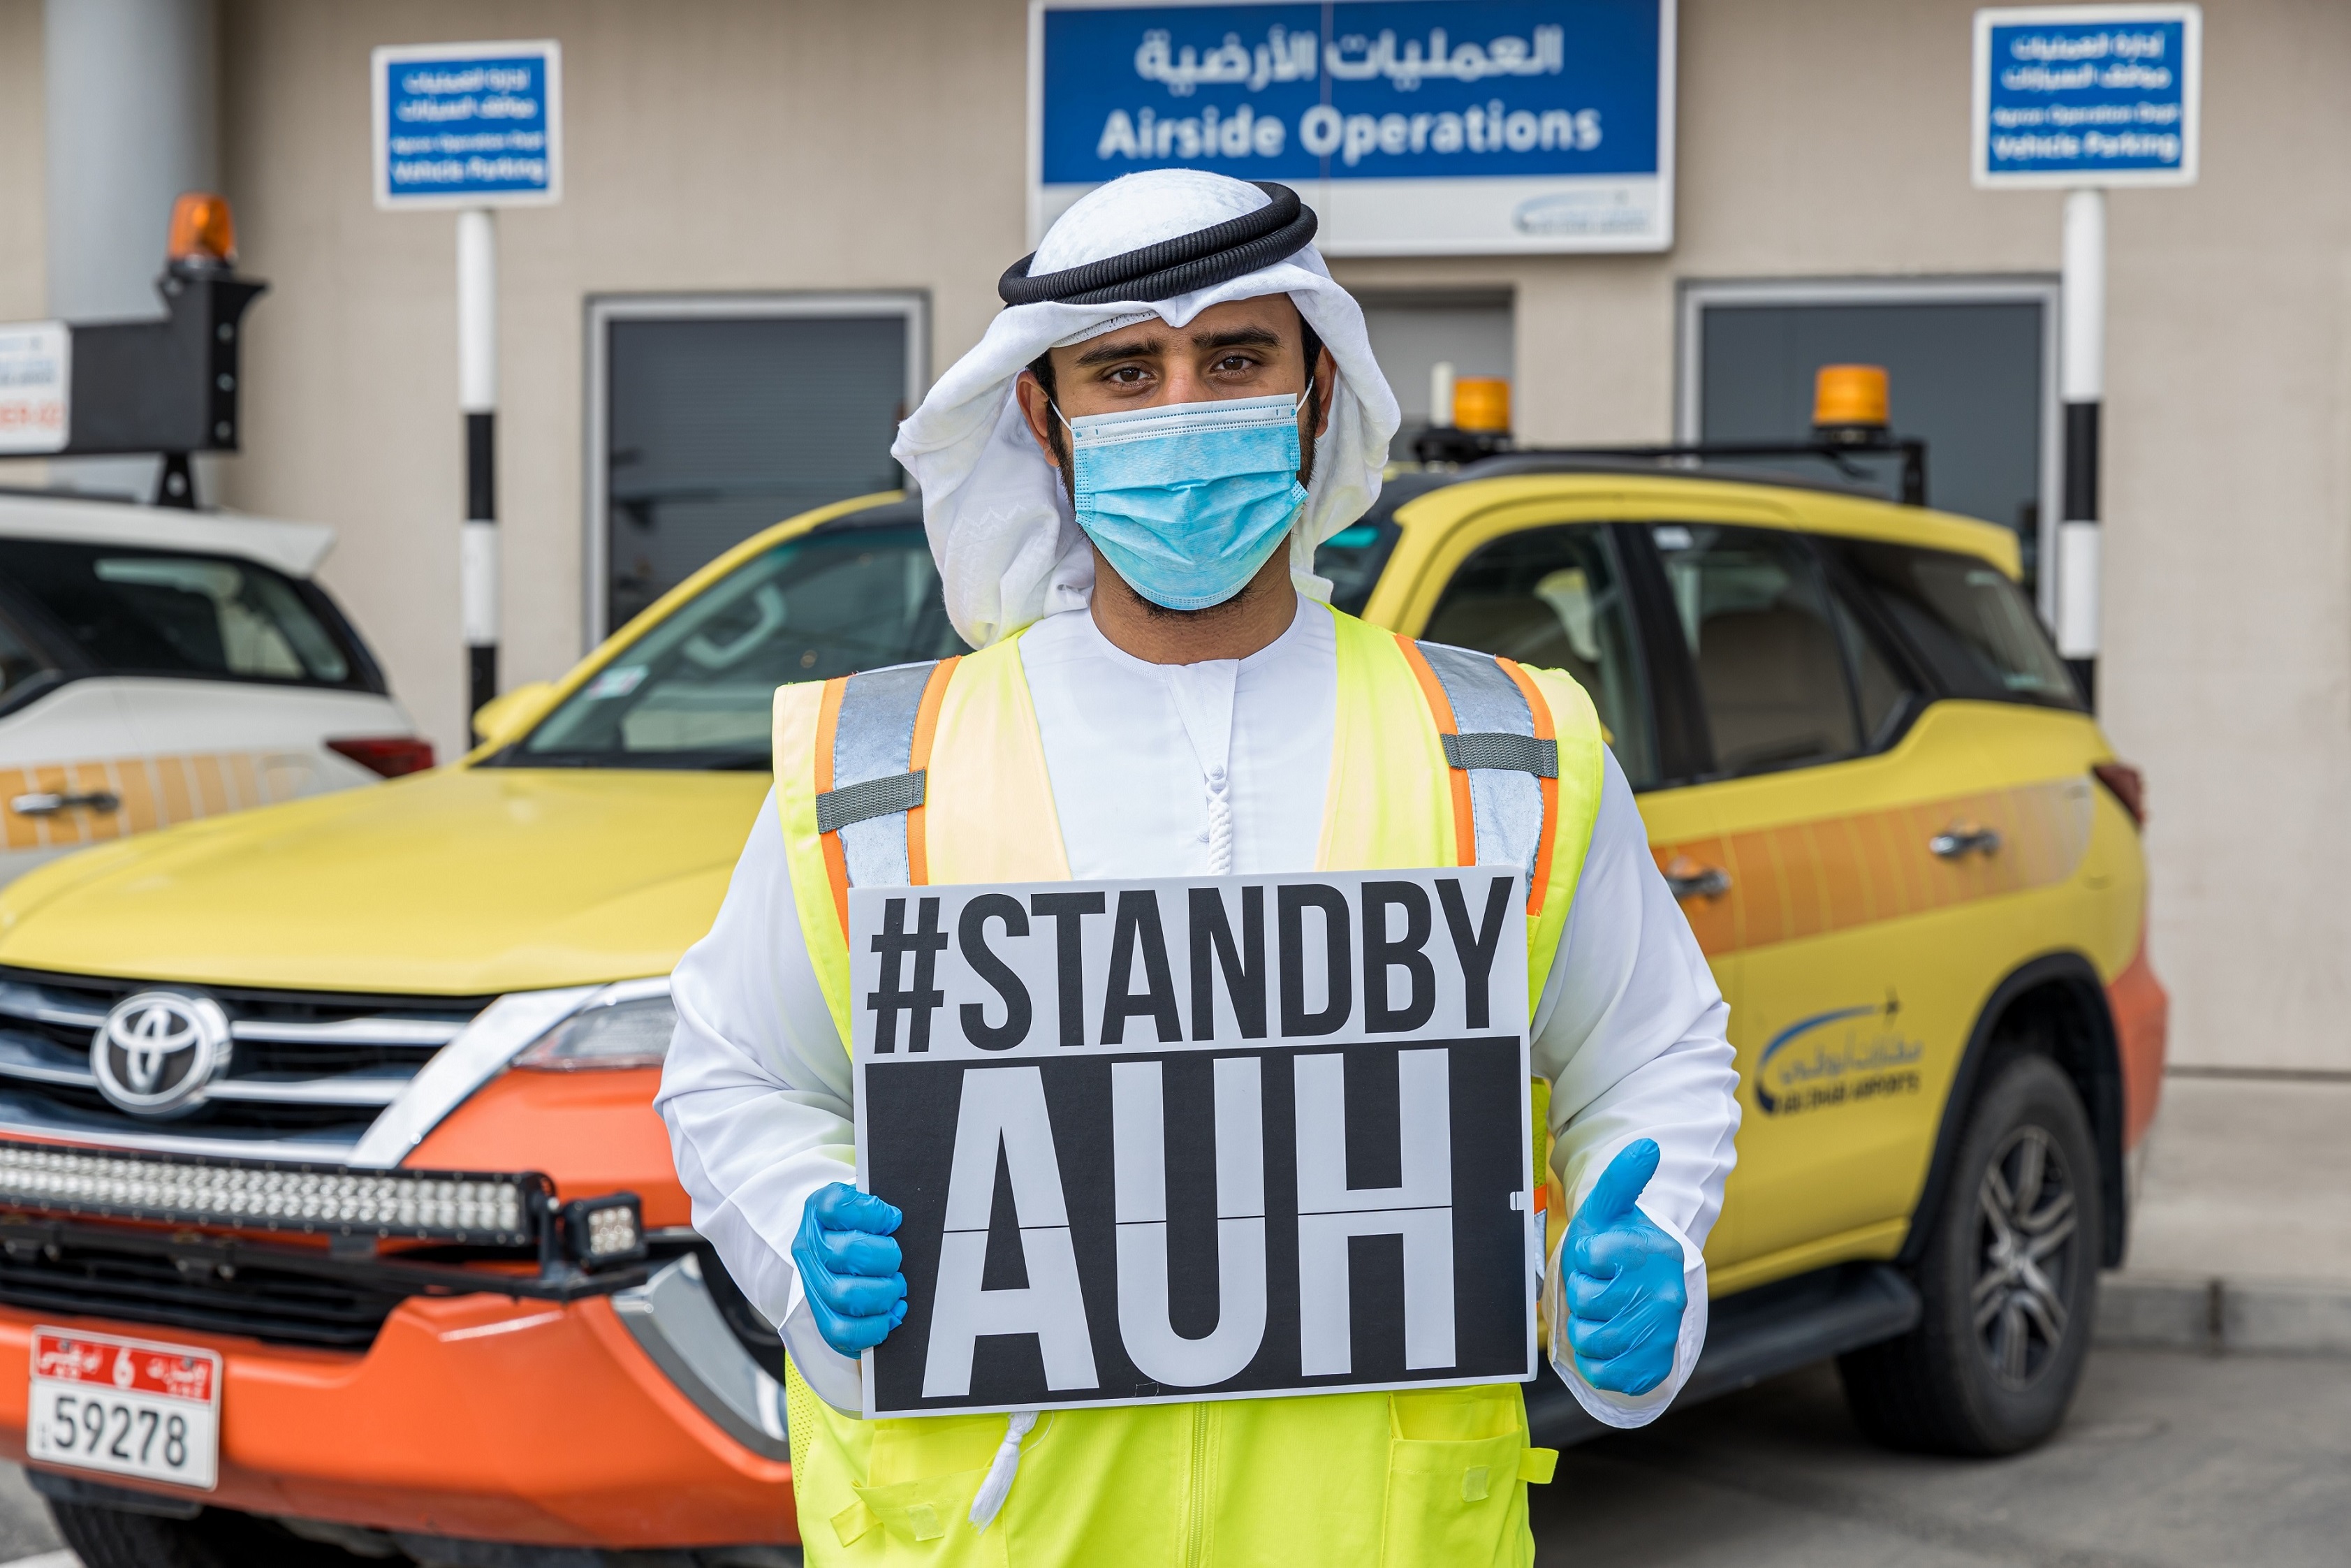 Abu Dhabi Airports Launches #StandbyAUH Campaign To Recognise Efforts Of Airport Staff During The COVID-19 Pandemic